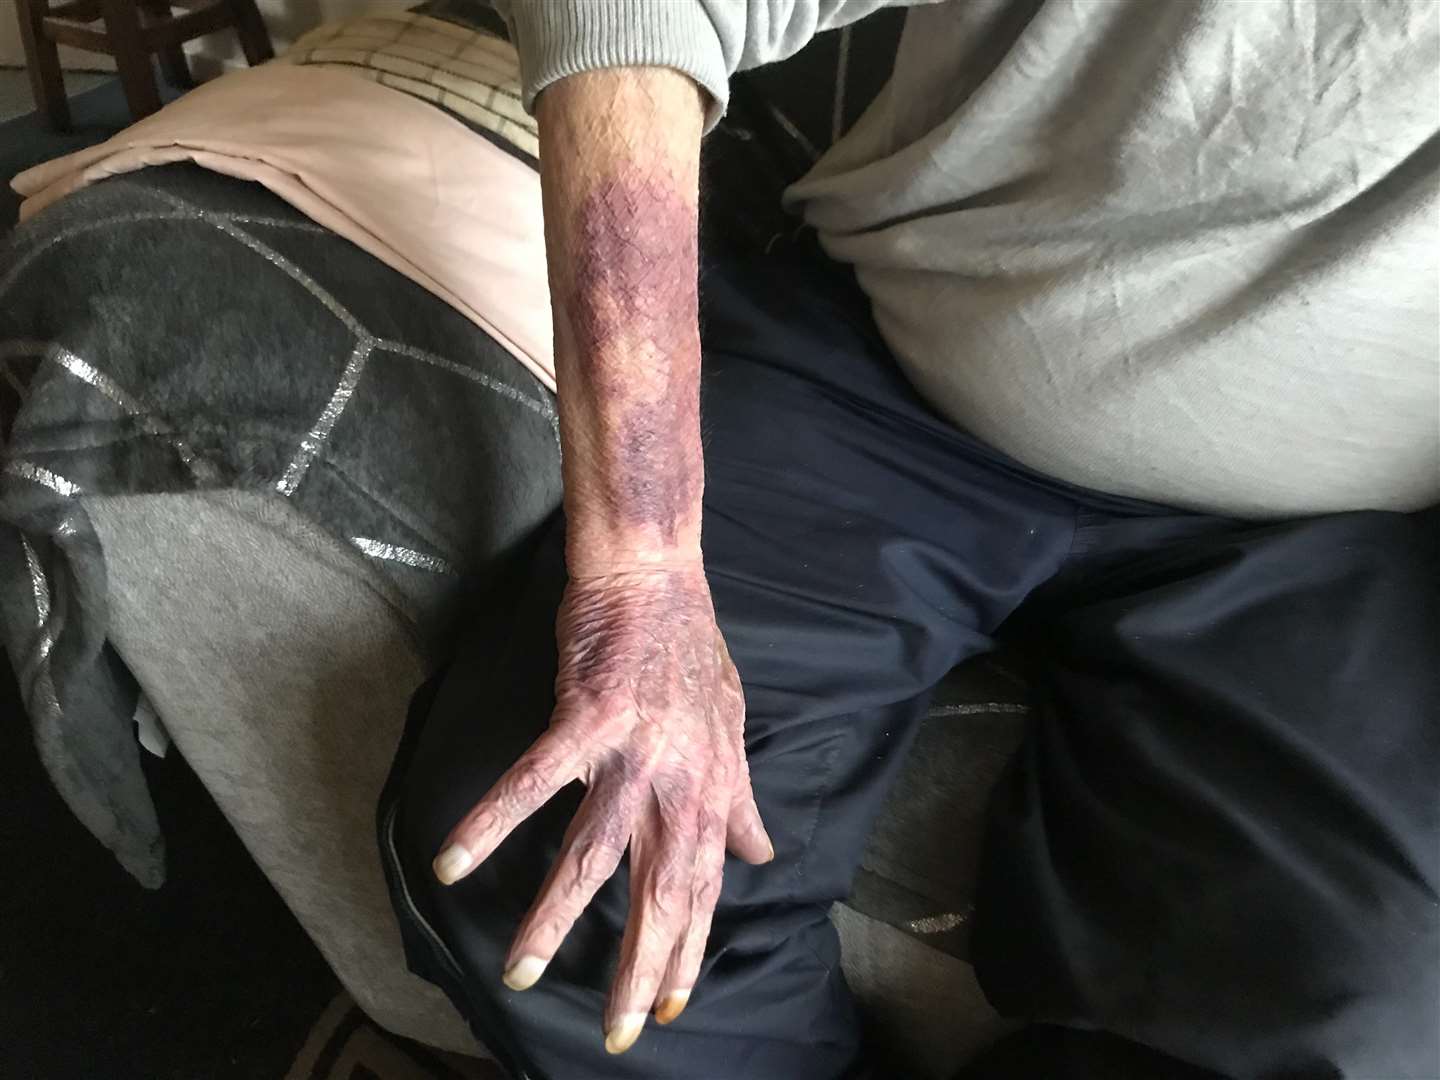 Arthur's bruised arm after the attack last year